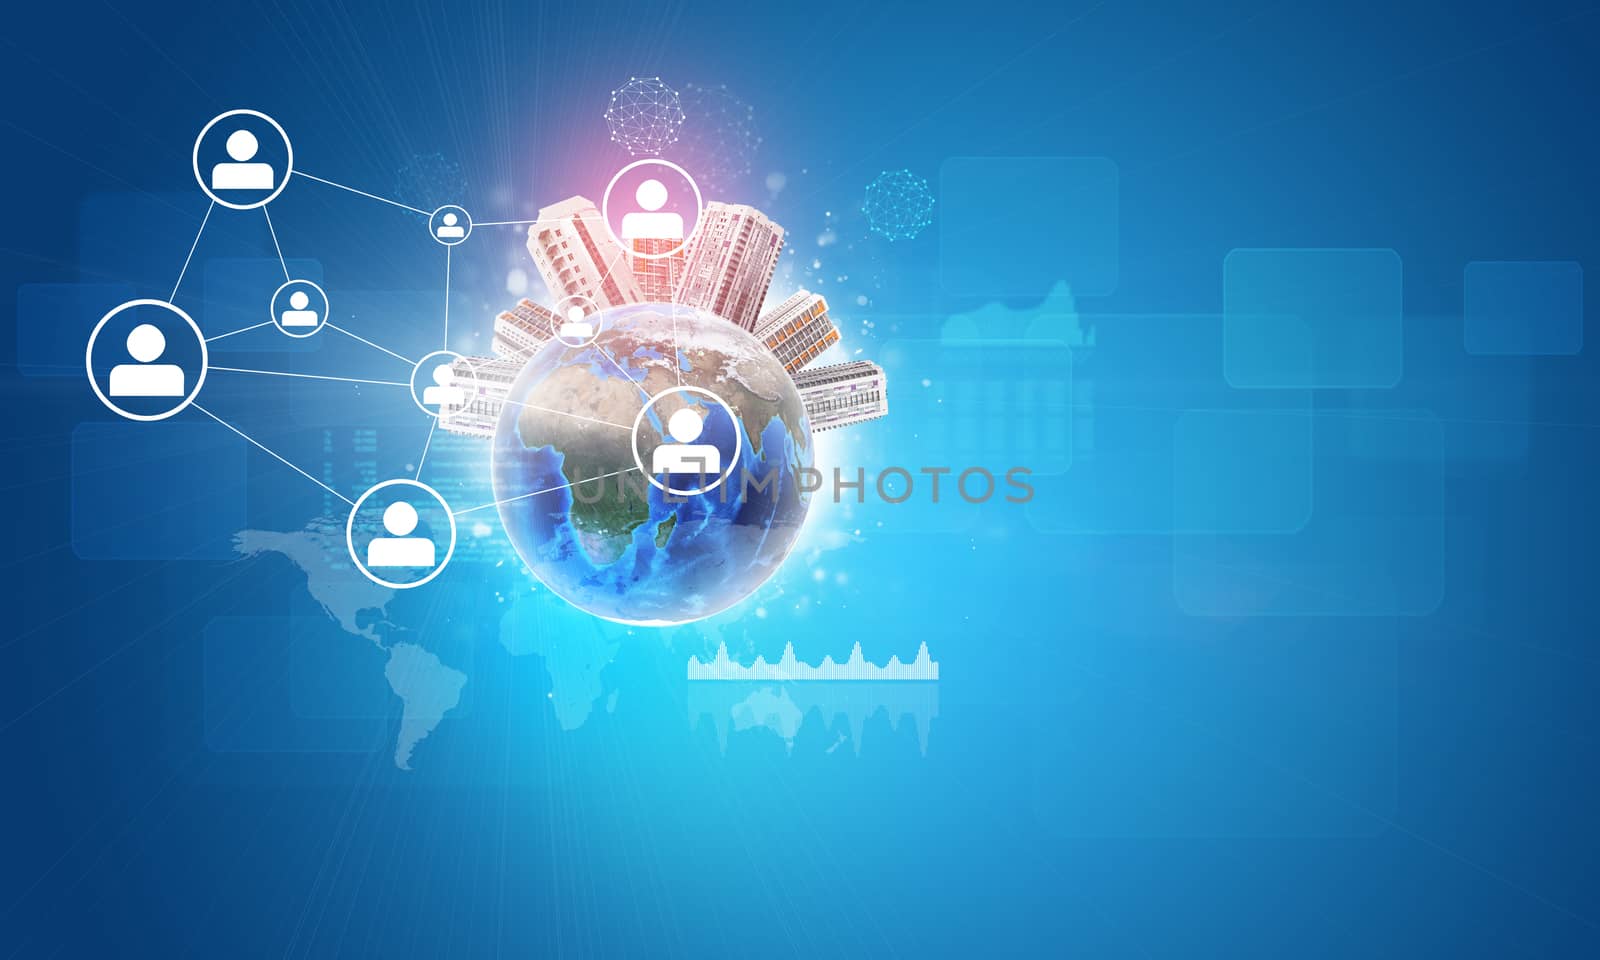 Globe with buildings on top and network with person icons, on blue background. Element of this image furnished by NASA